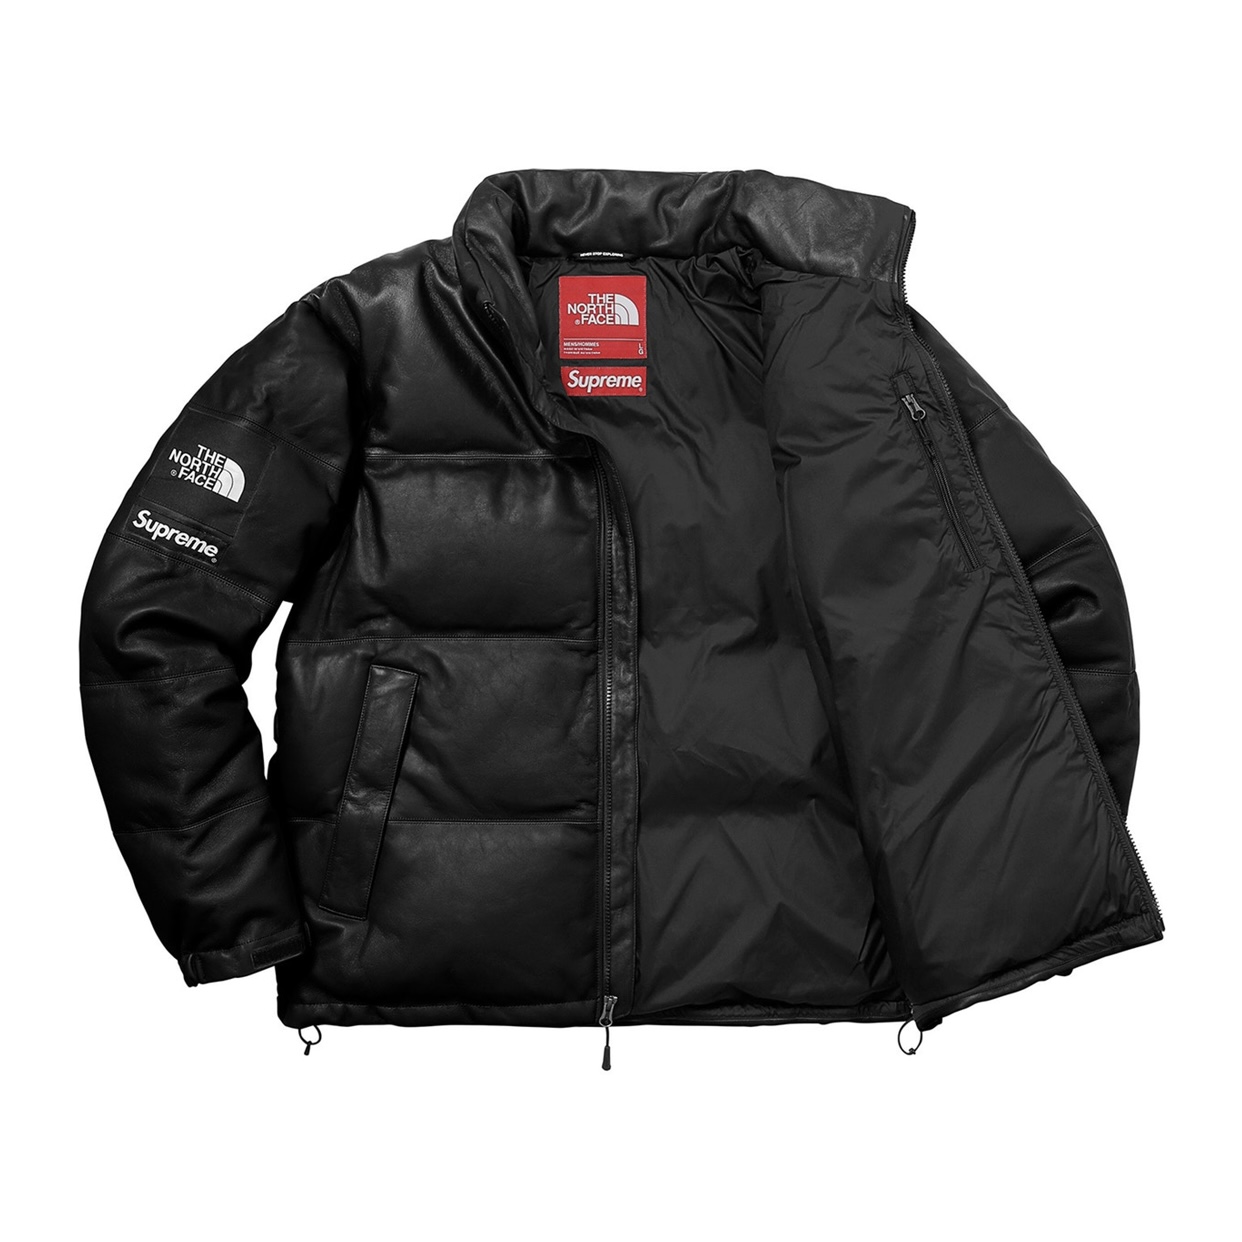 SUPREME×THE NORTH FACE 17FW LEATHER NUPTSE JACKET シュプリーム